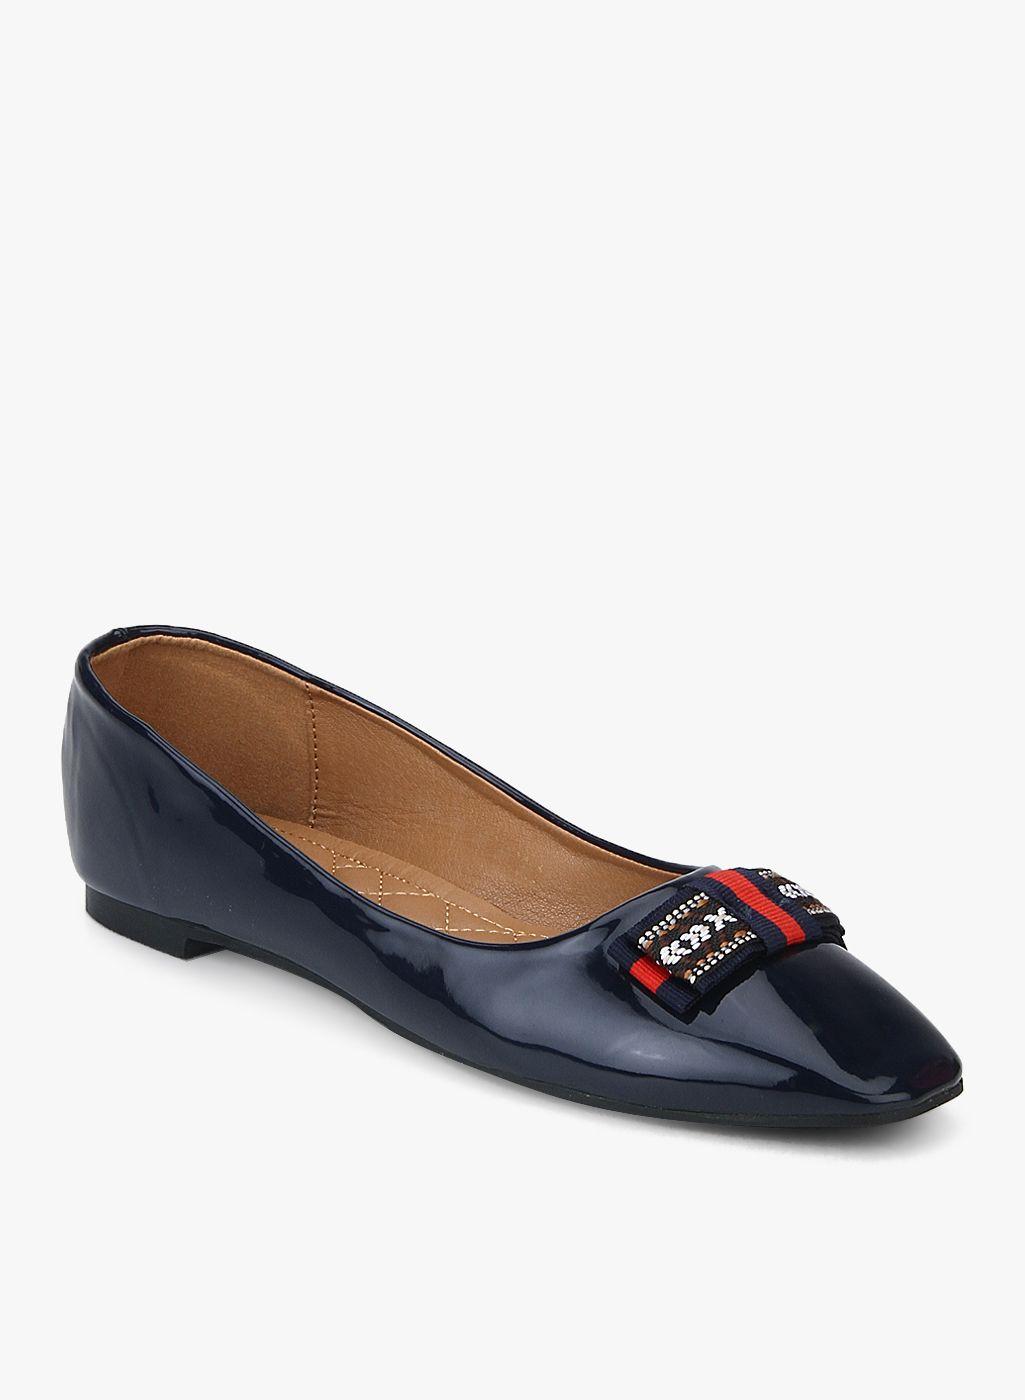 navy-blue-belly-shoes